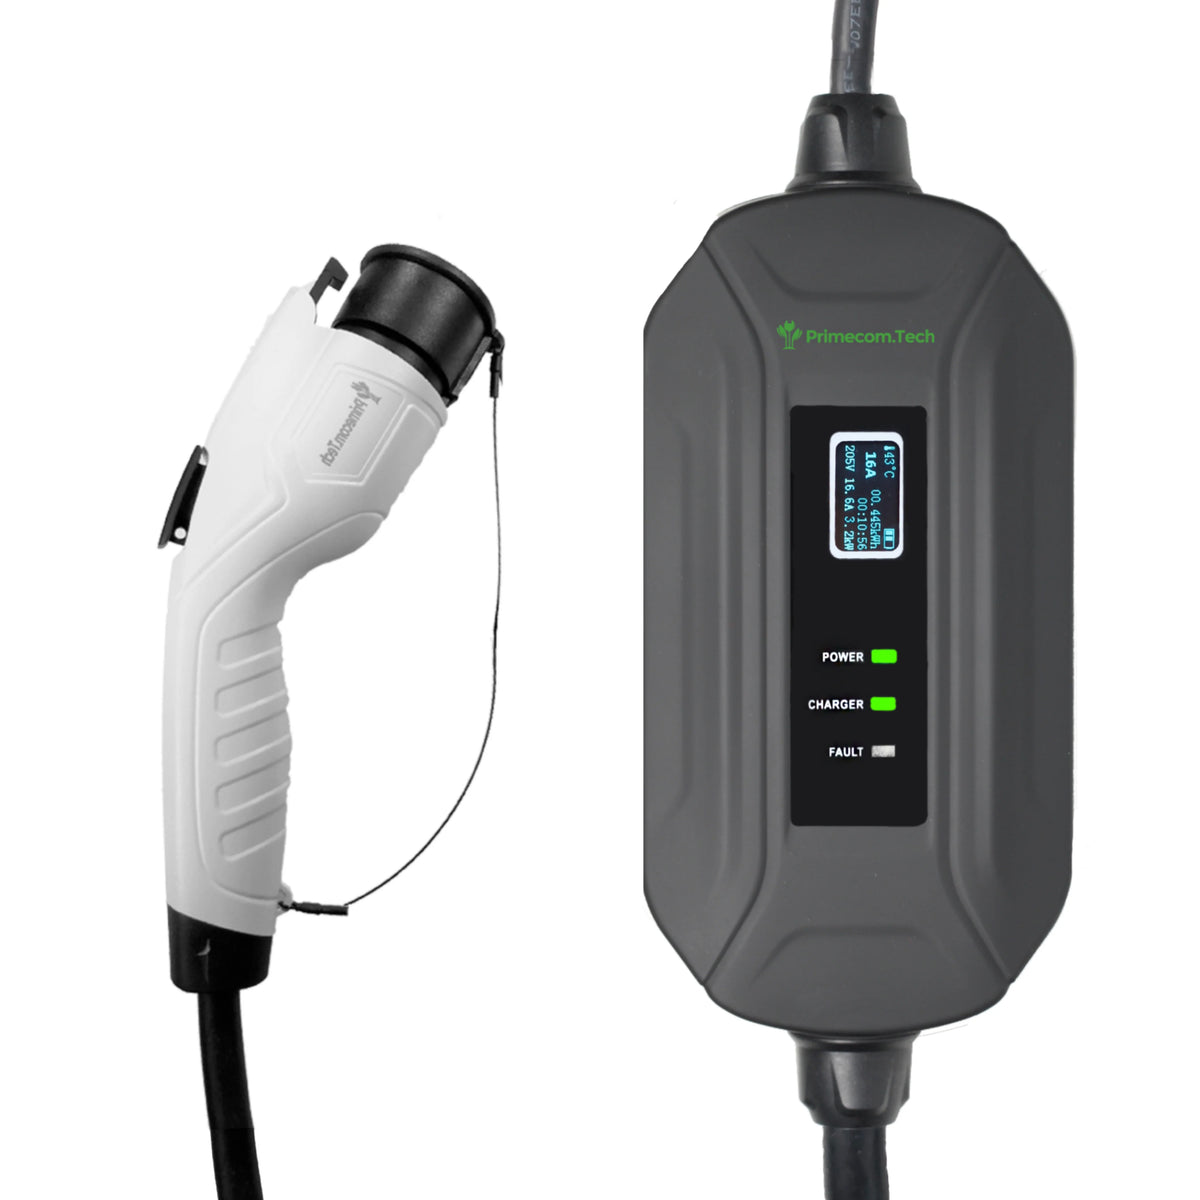 Primecomtech 277/480 Volt AC 2/3 Phase J1772 Level 2 EV Charger 80 Amp with Up to 50 Feet Cord Lengths (25 Feet)